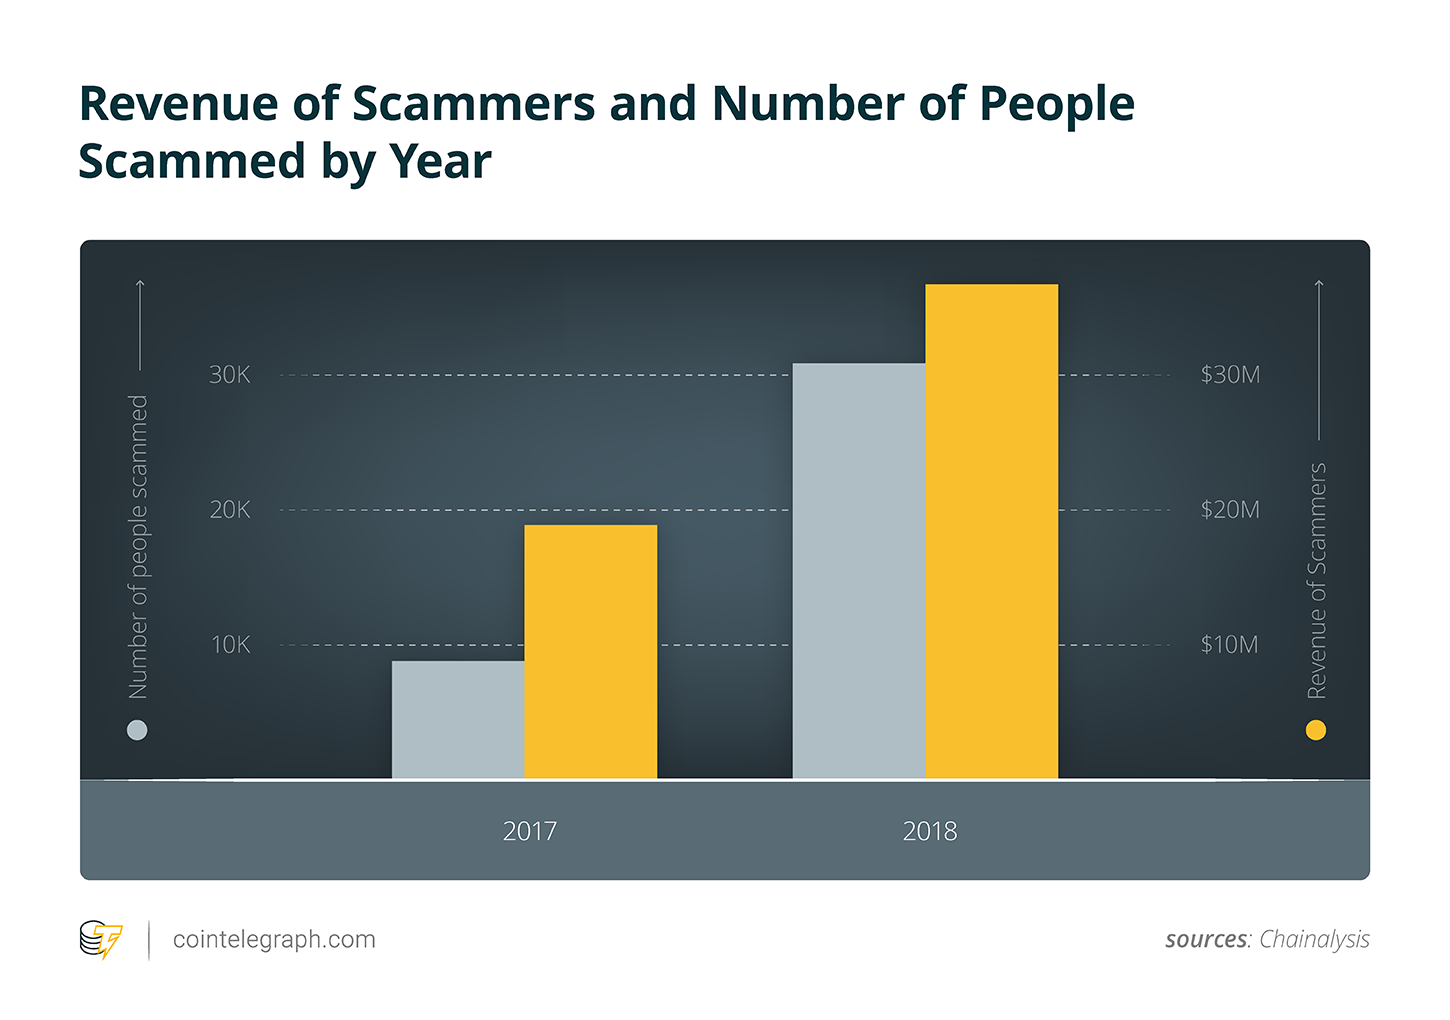 Revenue of Scammers and Number of People Scammed by Year